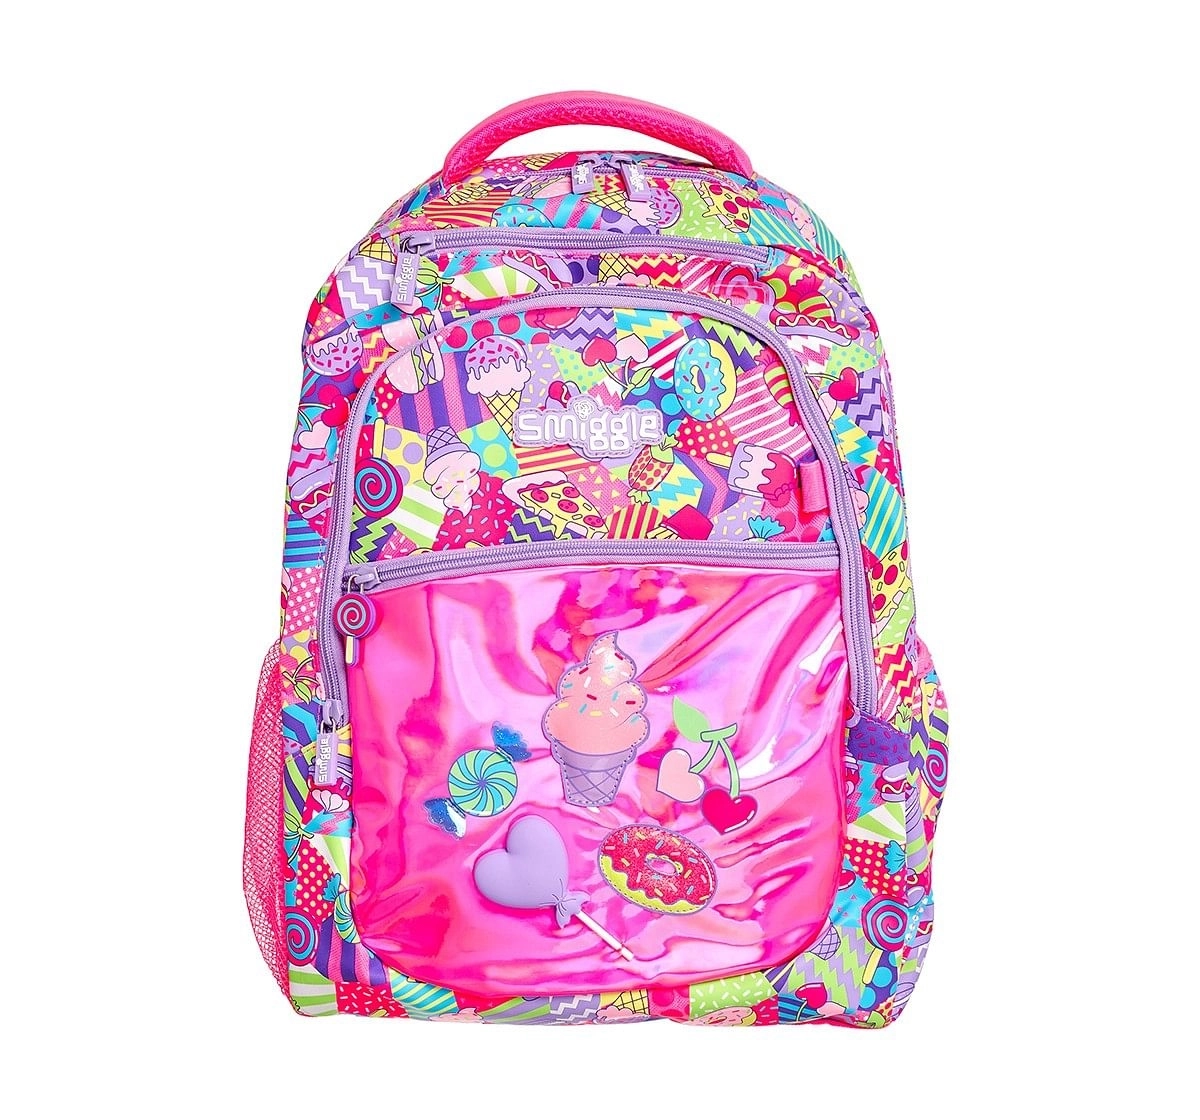 Smiggle Far Away Backpack - Ice-cream Print Bags for Kids age 3Y+ (Pink)